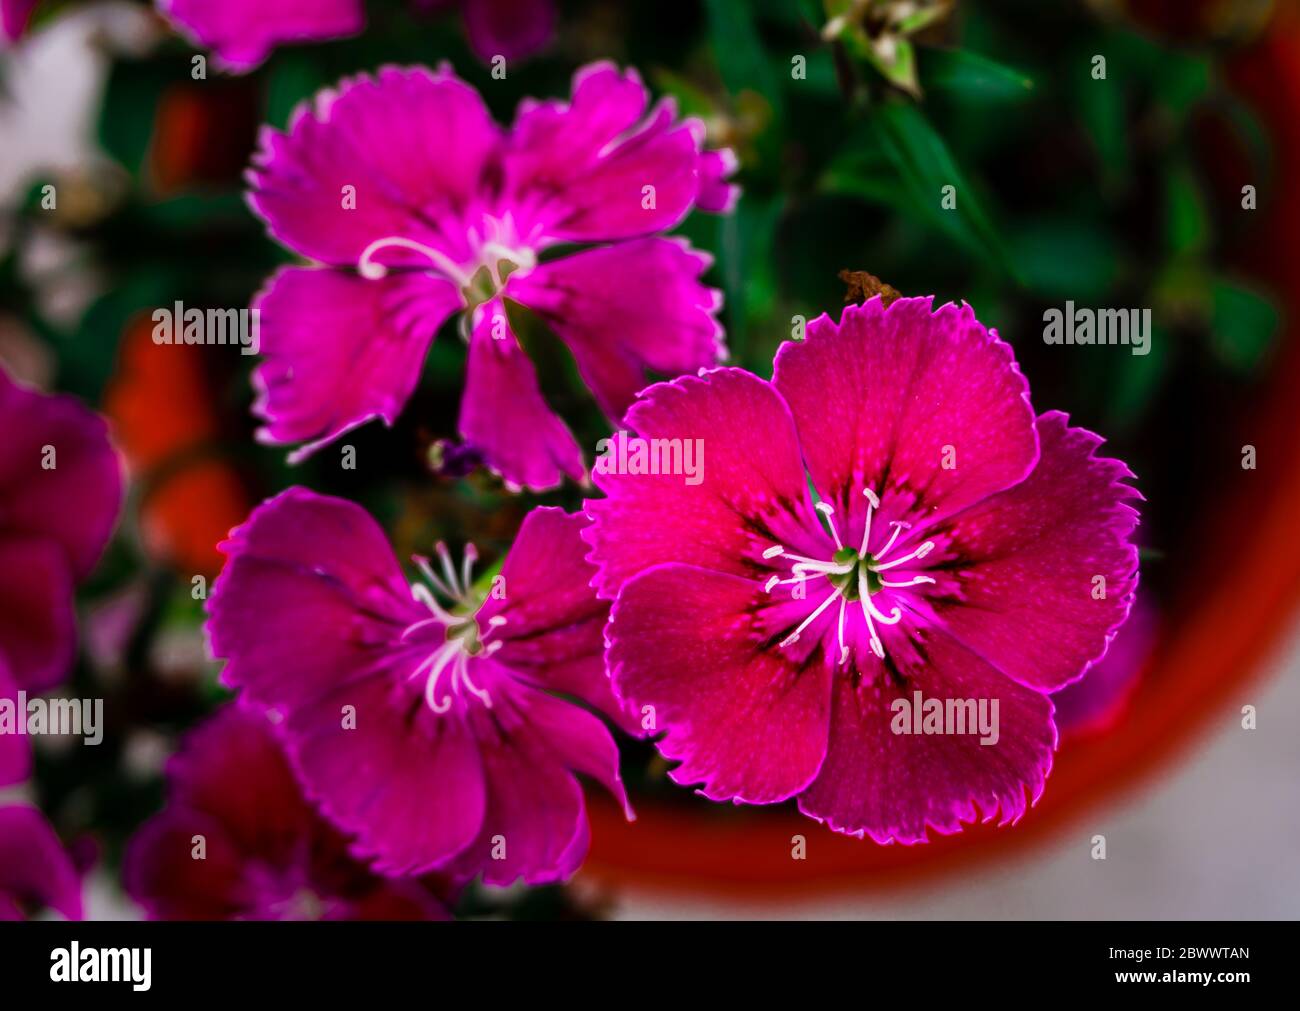 A clsoe up shot of MAIDEN PINK flowers on a pot.Dianthus deltoides, the maiden pink, is a species of Dianthus native to most of Europe and western Asi Stock Photo